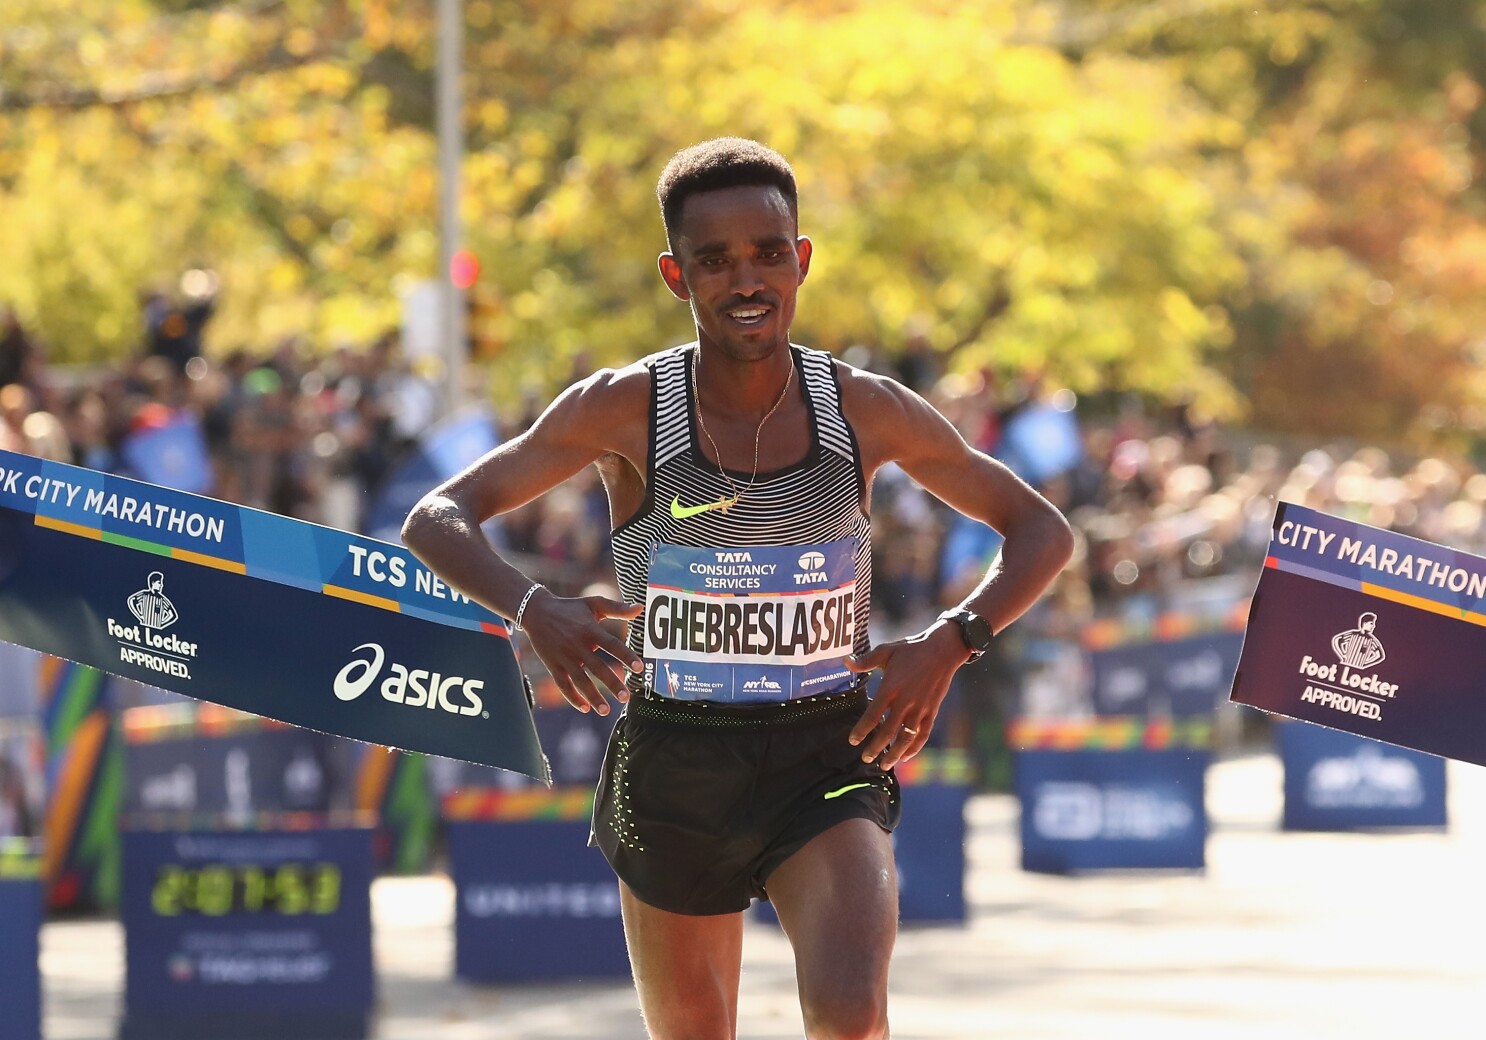 How Old Was The Youngest Person To Ever Complete The NYC Marathon?